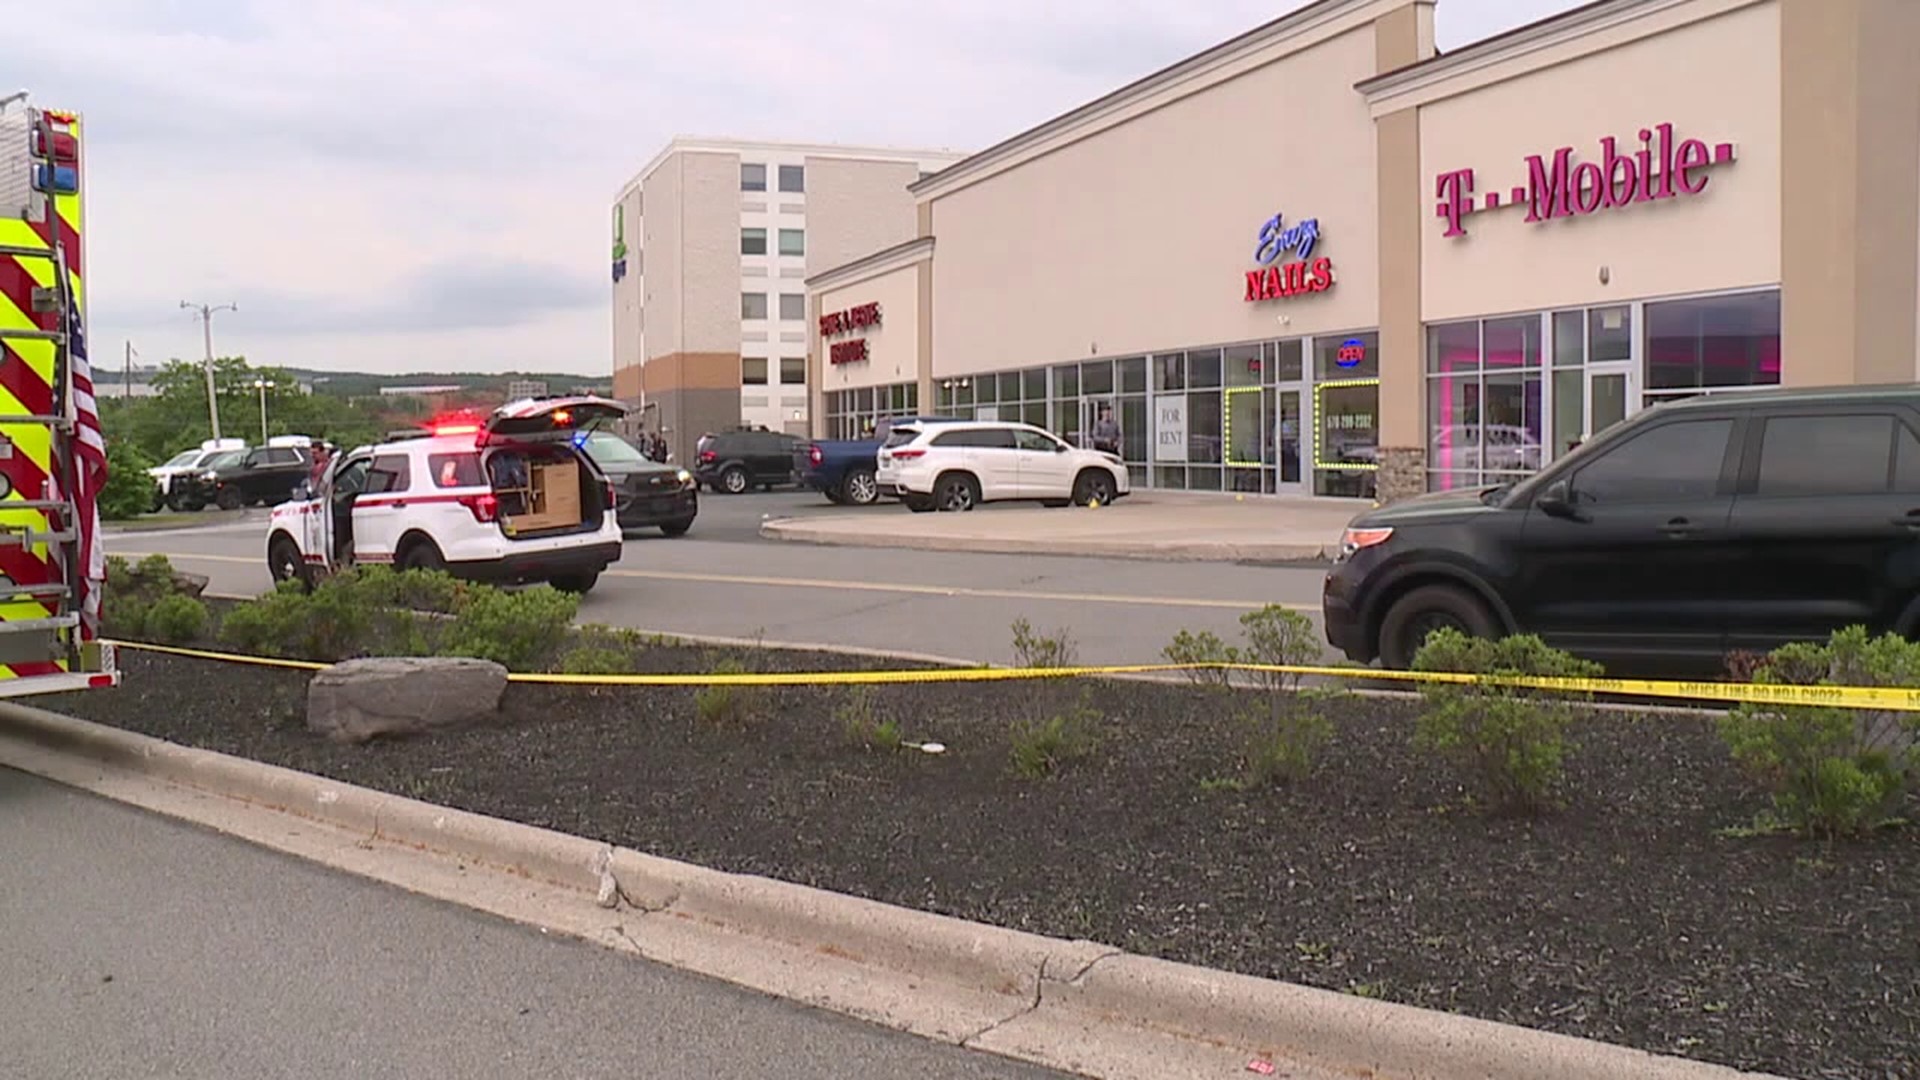 A woman was injured in an early-June shooting at a shopping complex. We're learning the man charged with attempted homicide wasn't the only one who fired shots.